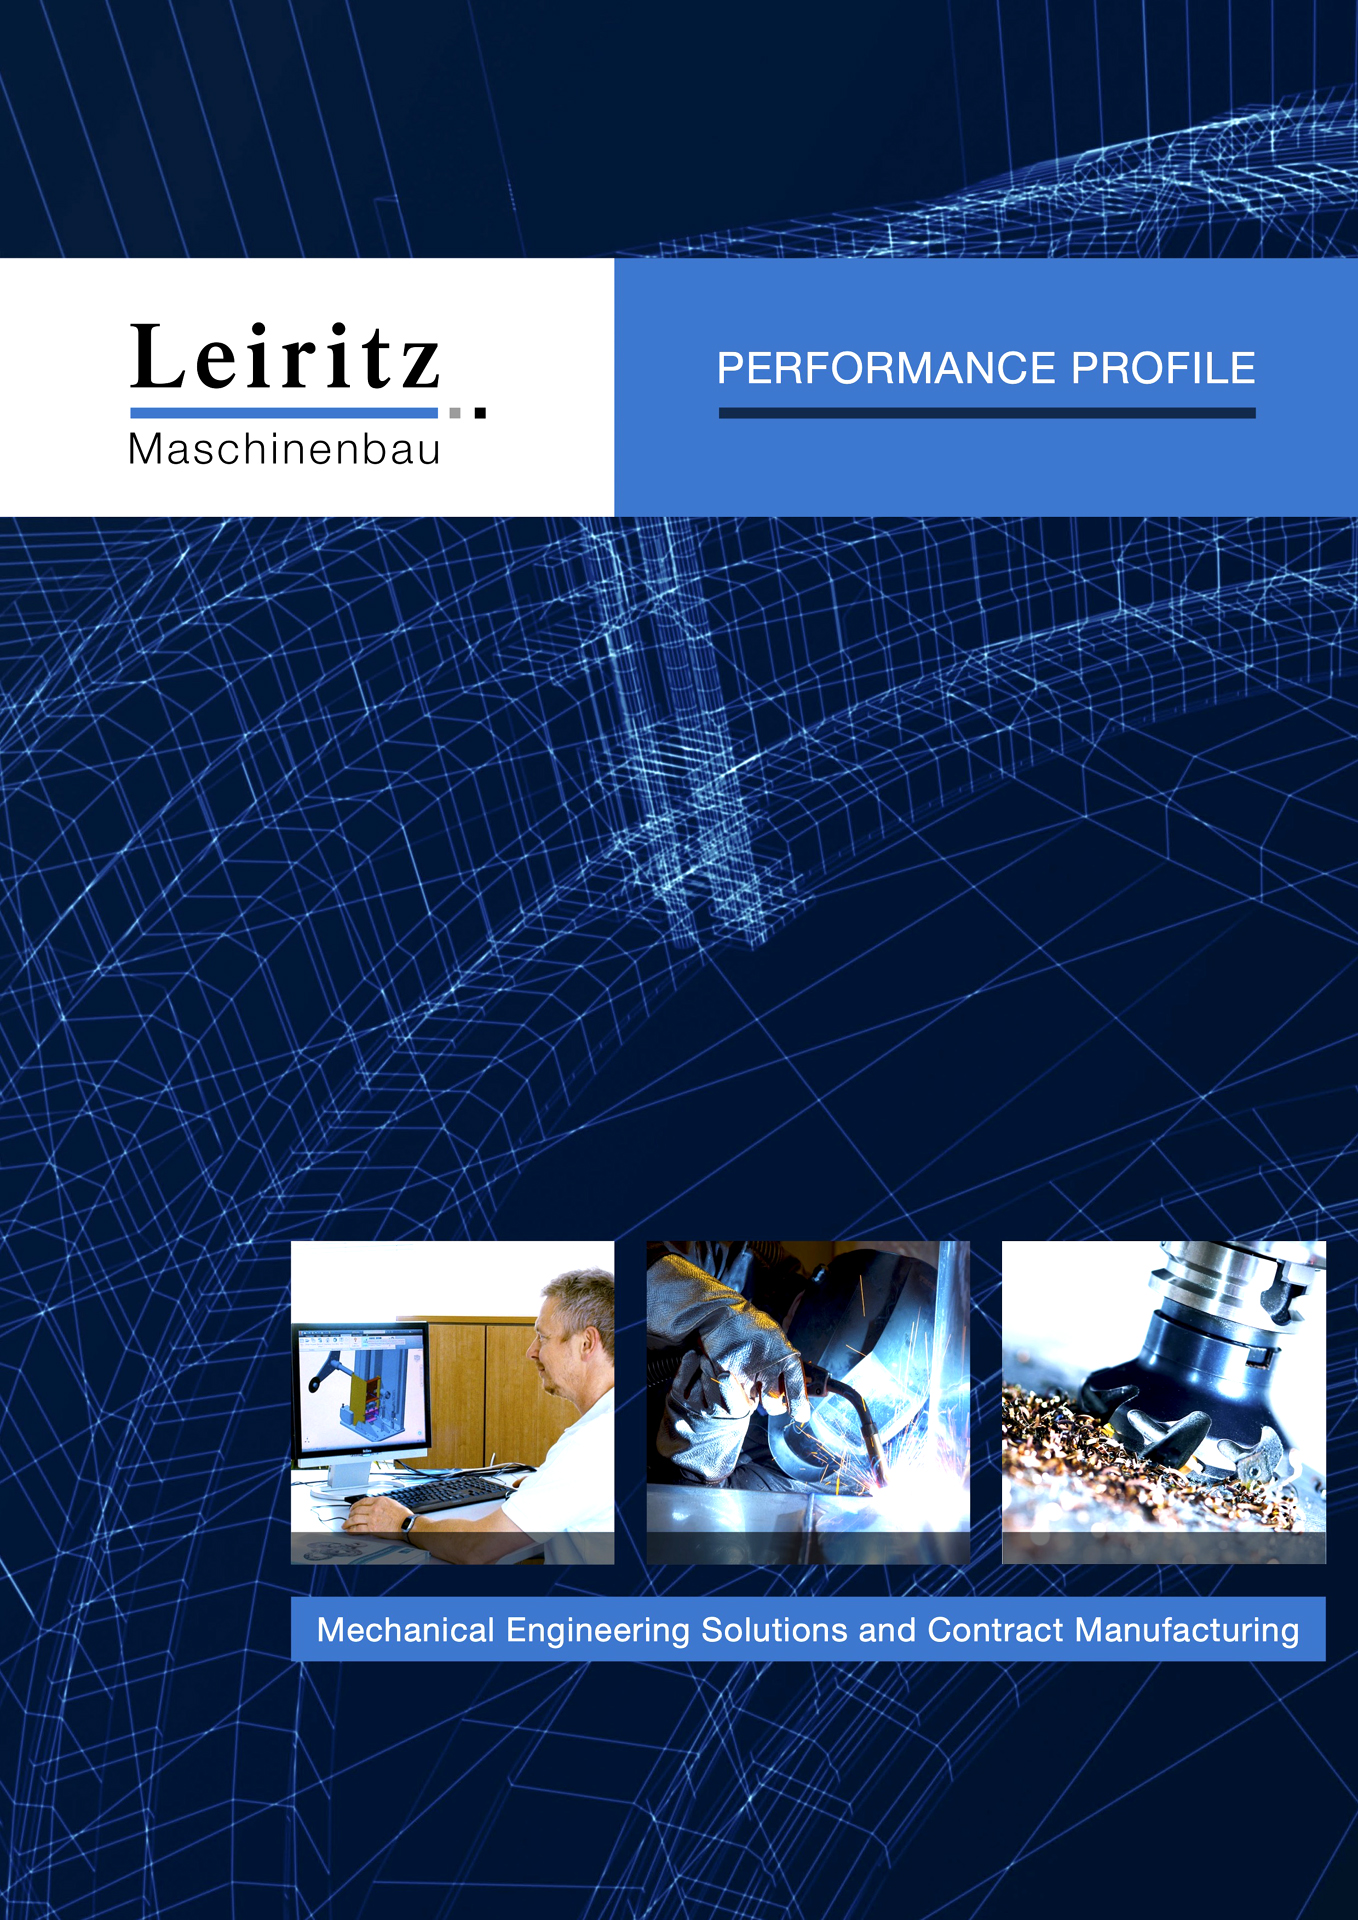 Leiritz is a medern mechanical engineering manufacturer from Bavaria, Germany.